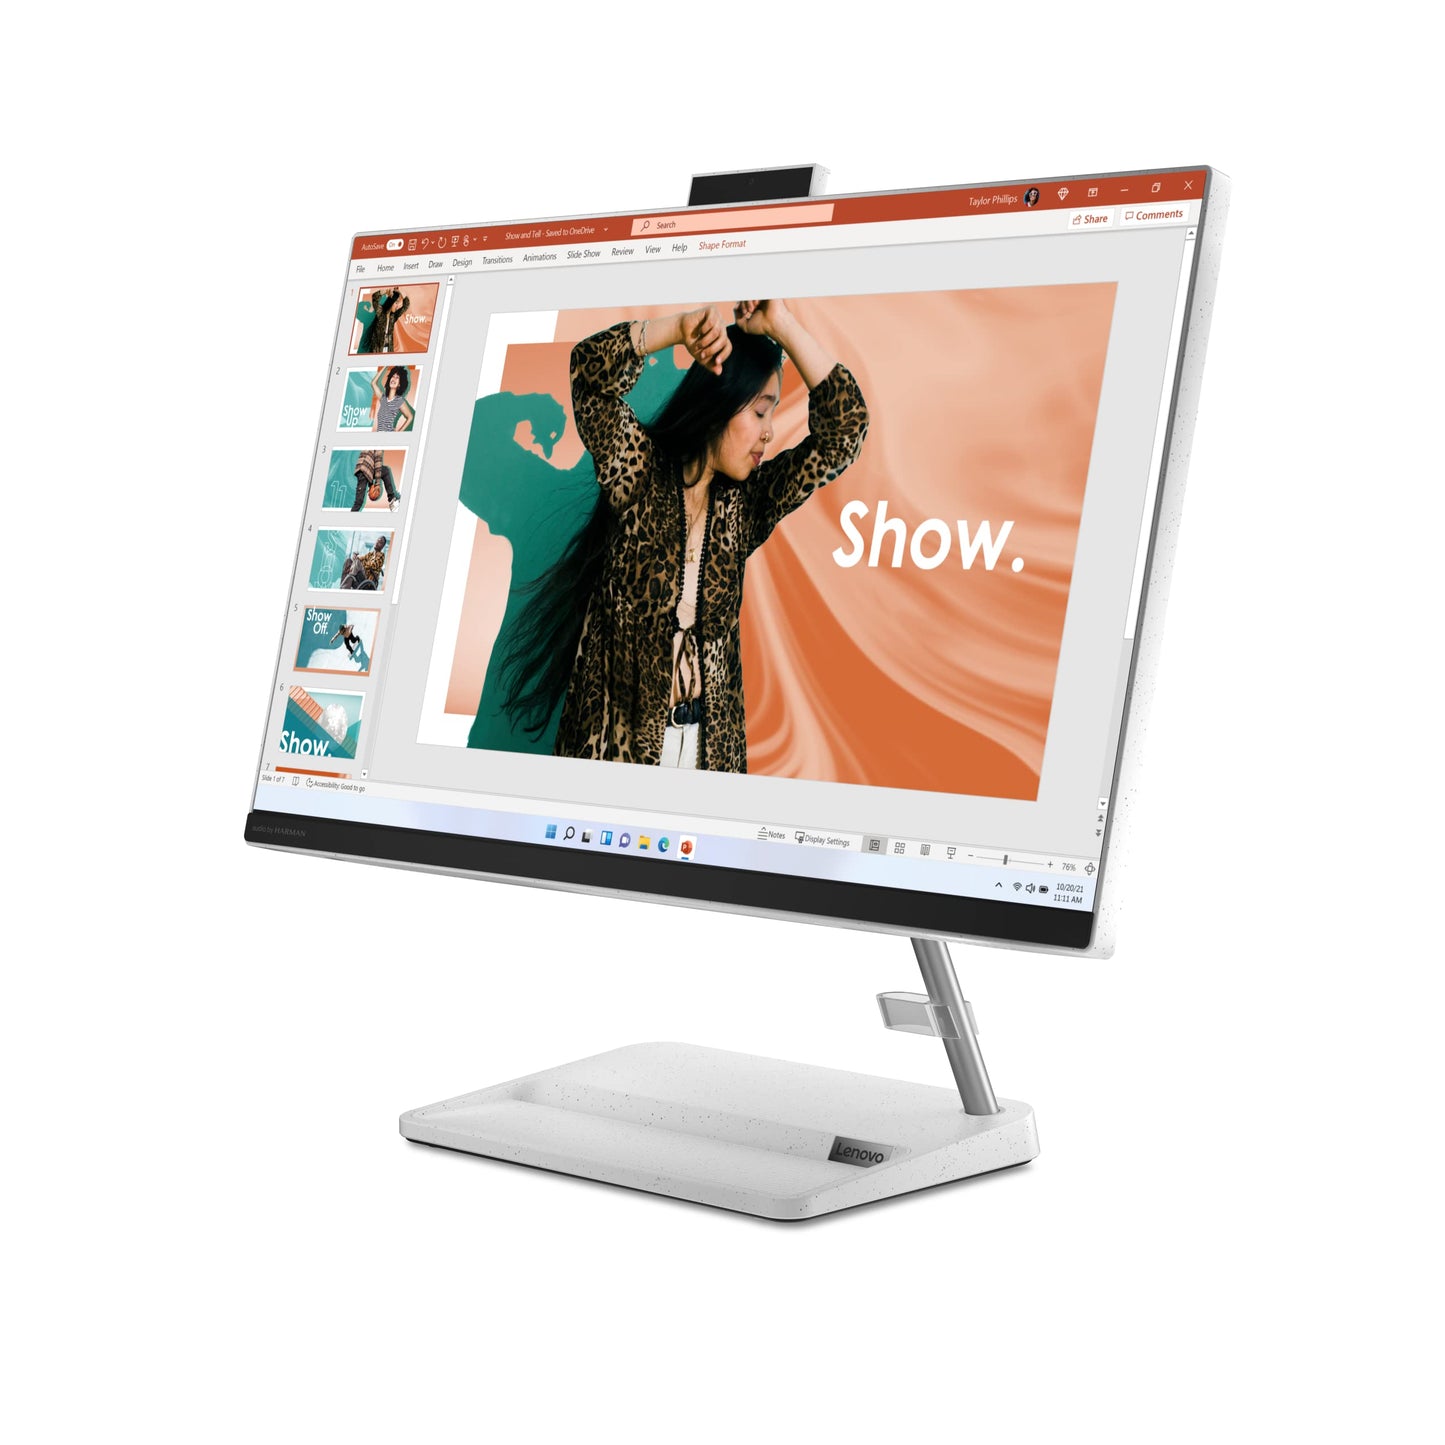 Lenovo IdeaCentre AIO3 with Intel 12th Gen Core i5-1240P, Integrated Intel Iris Xe Graphics, 23.8" FHD Touch display, 8GB RAM, 512GB SSD, Windows 11, White - [F0GH00A4AX]